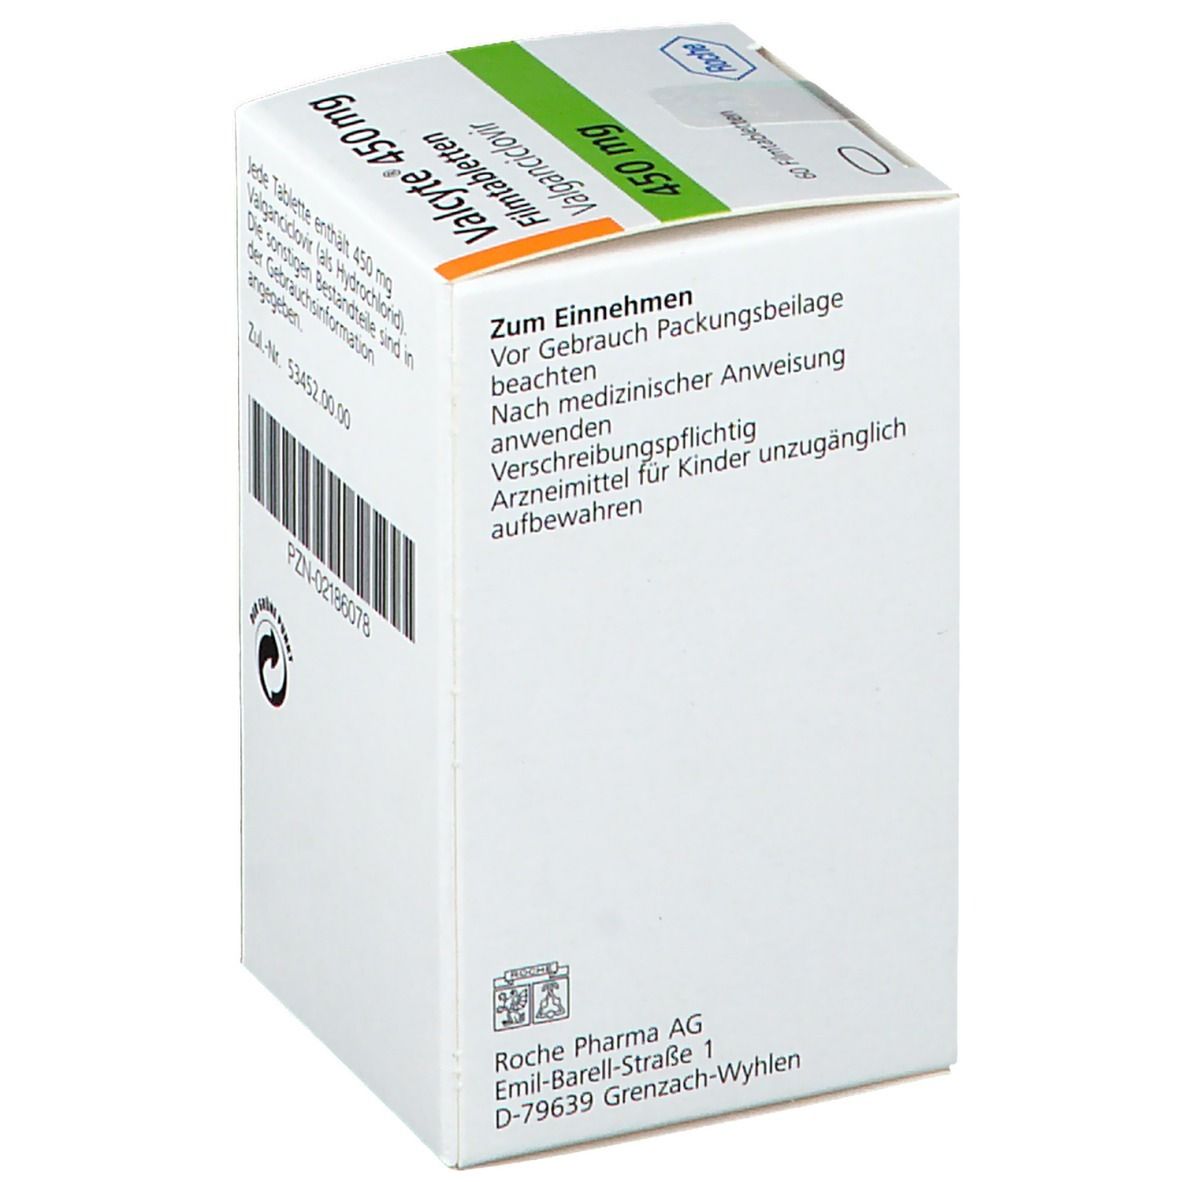 Valcyte® 450 mg